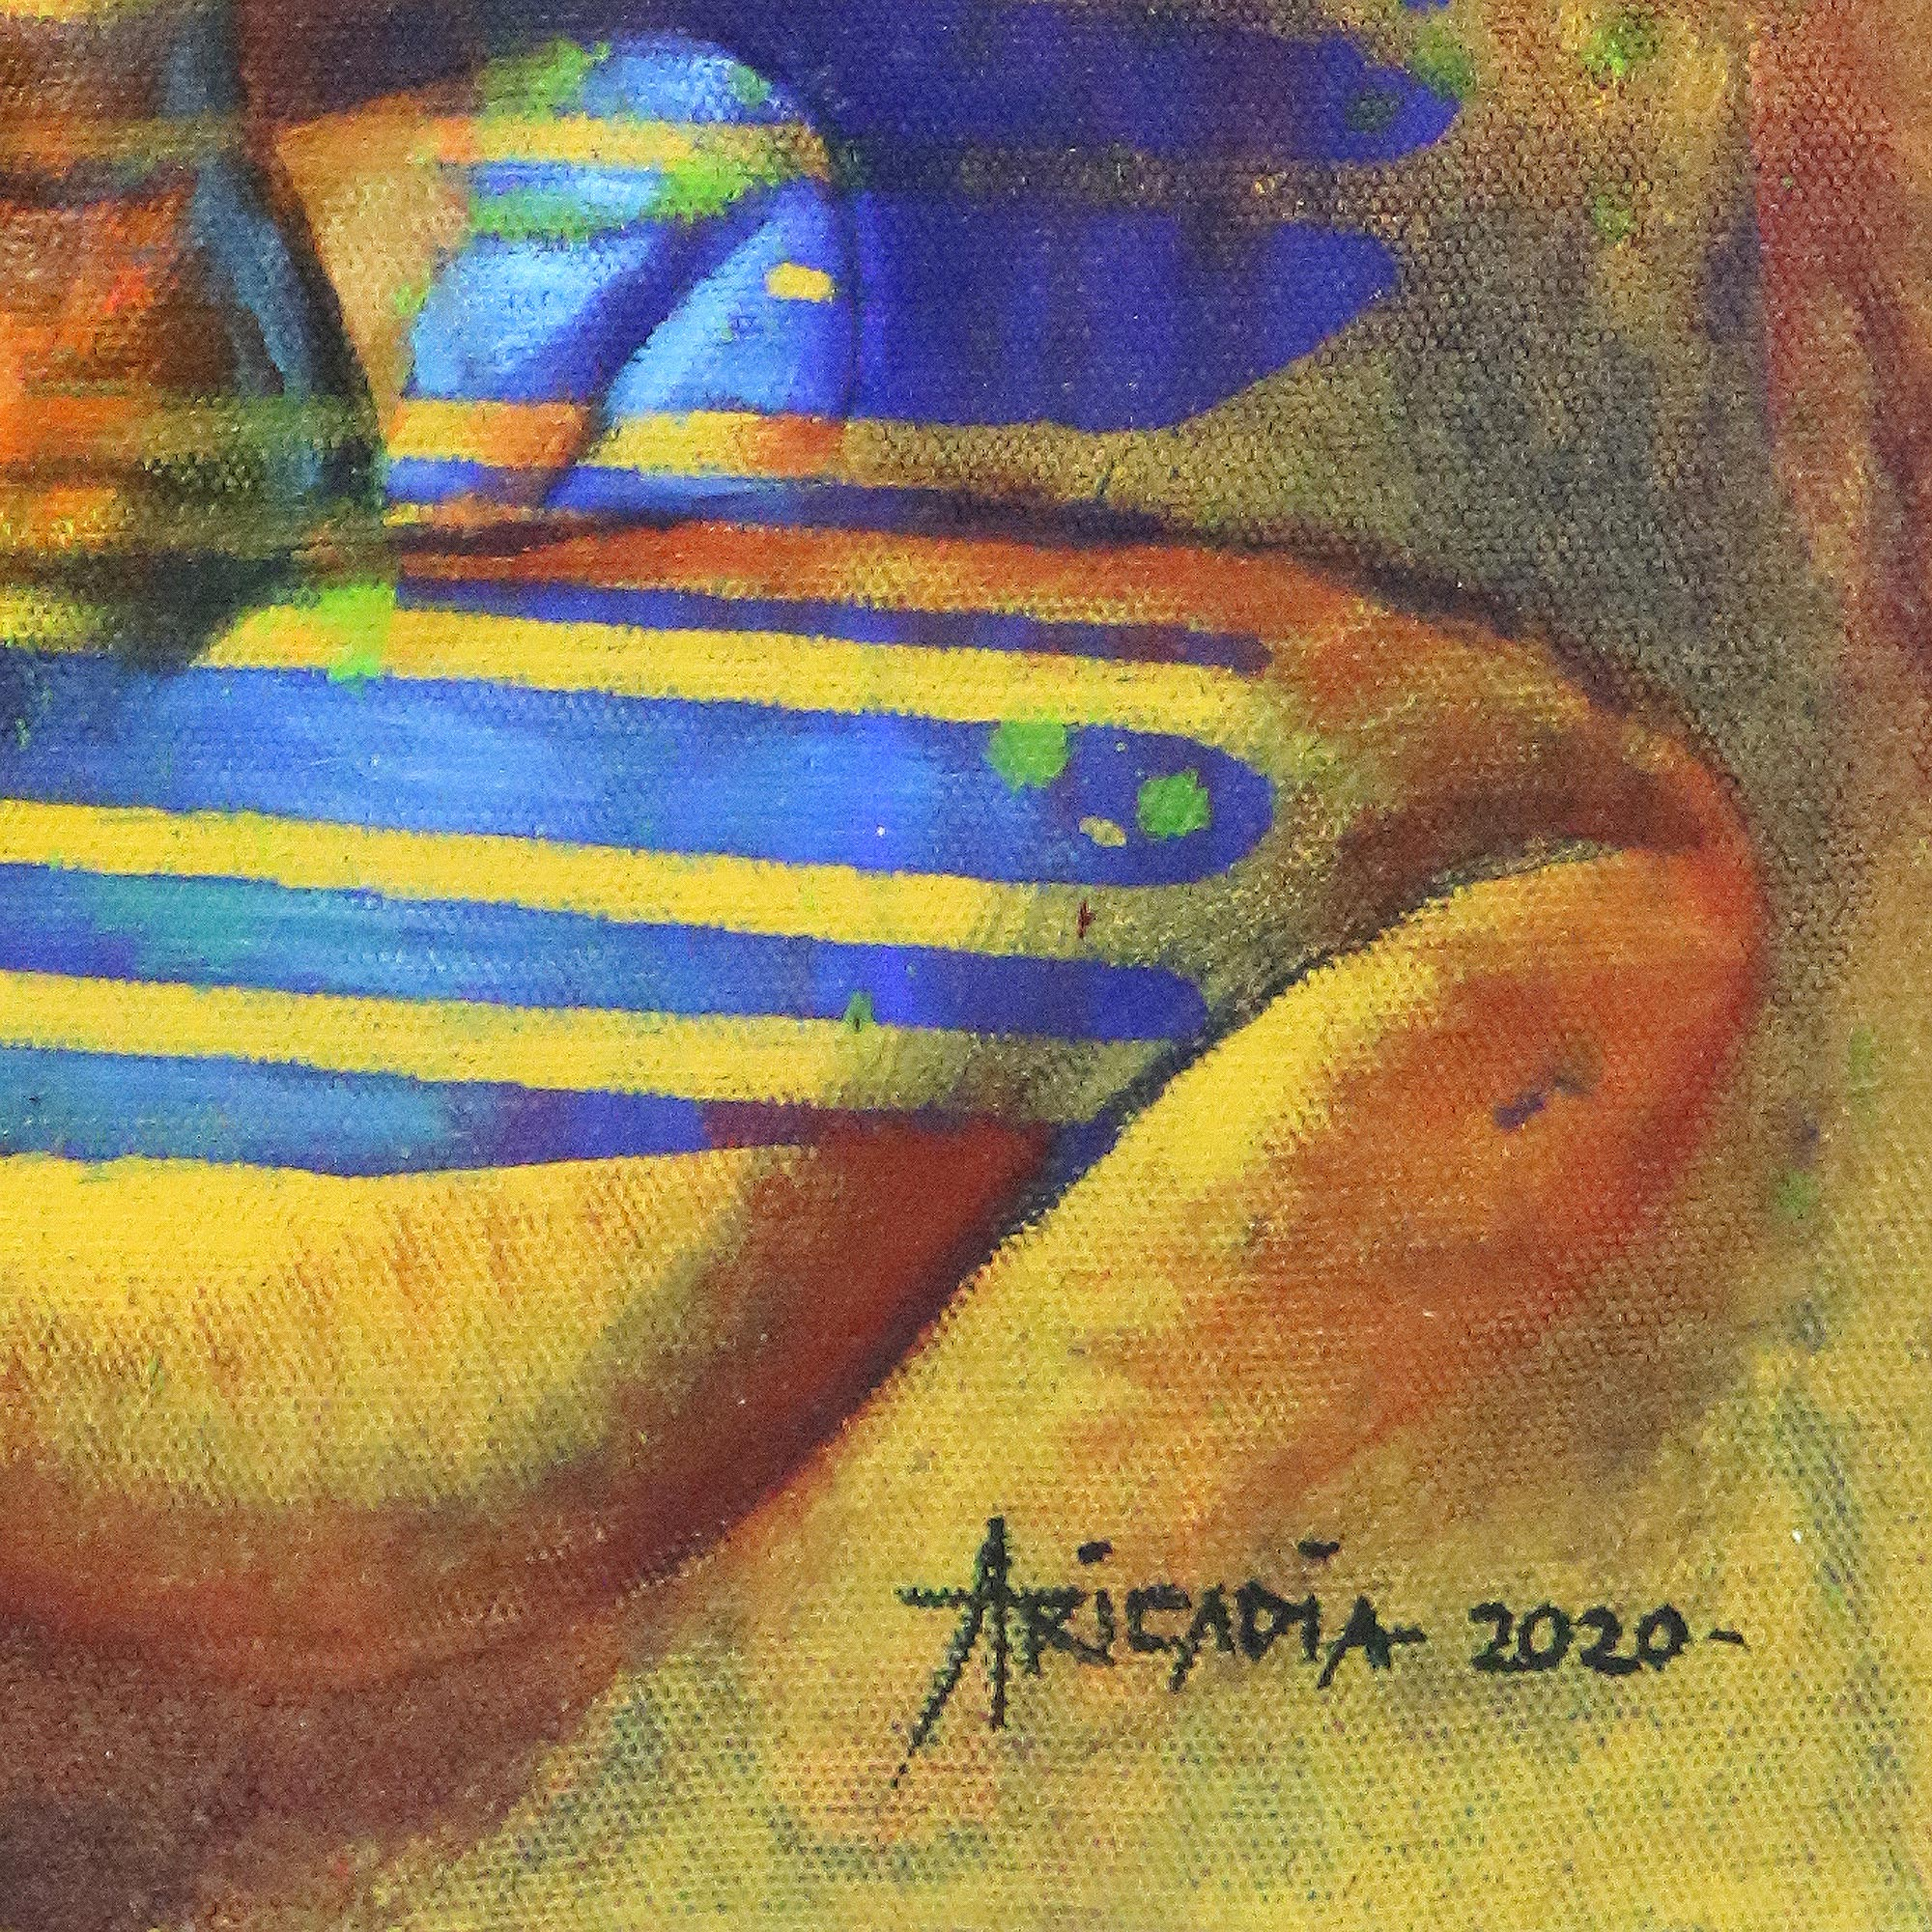 Original Signed Artistic Nude Painting In Rainbow Colors Life Must Go